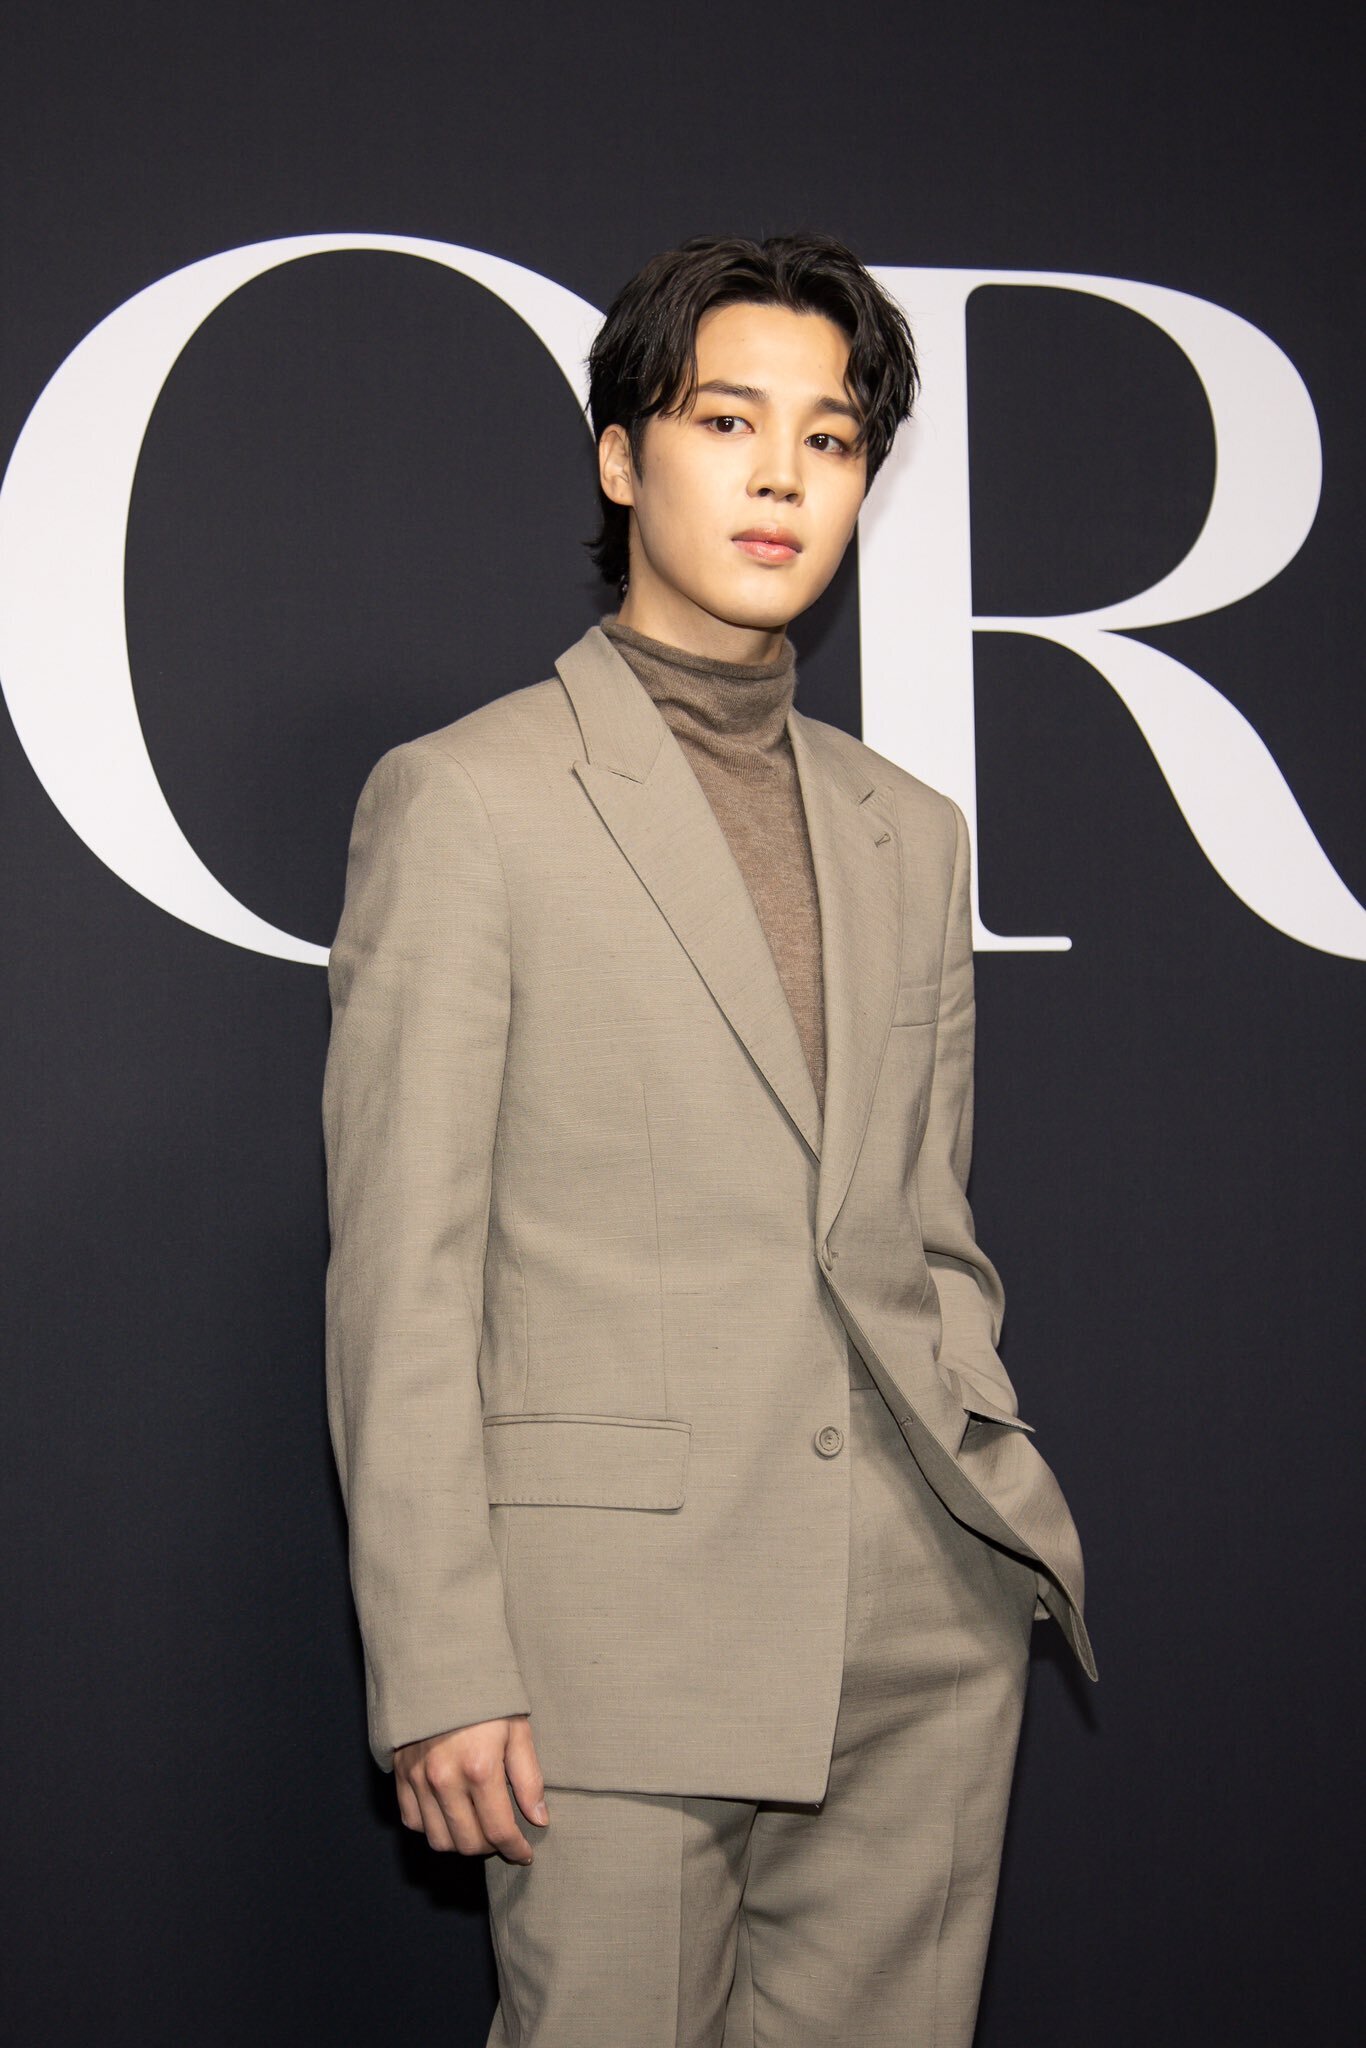 dior's new Spring 2024 collection sees global brand ambassador  @bts.bighitofficial Jimin as the face and model for the campaign. The…